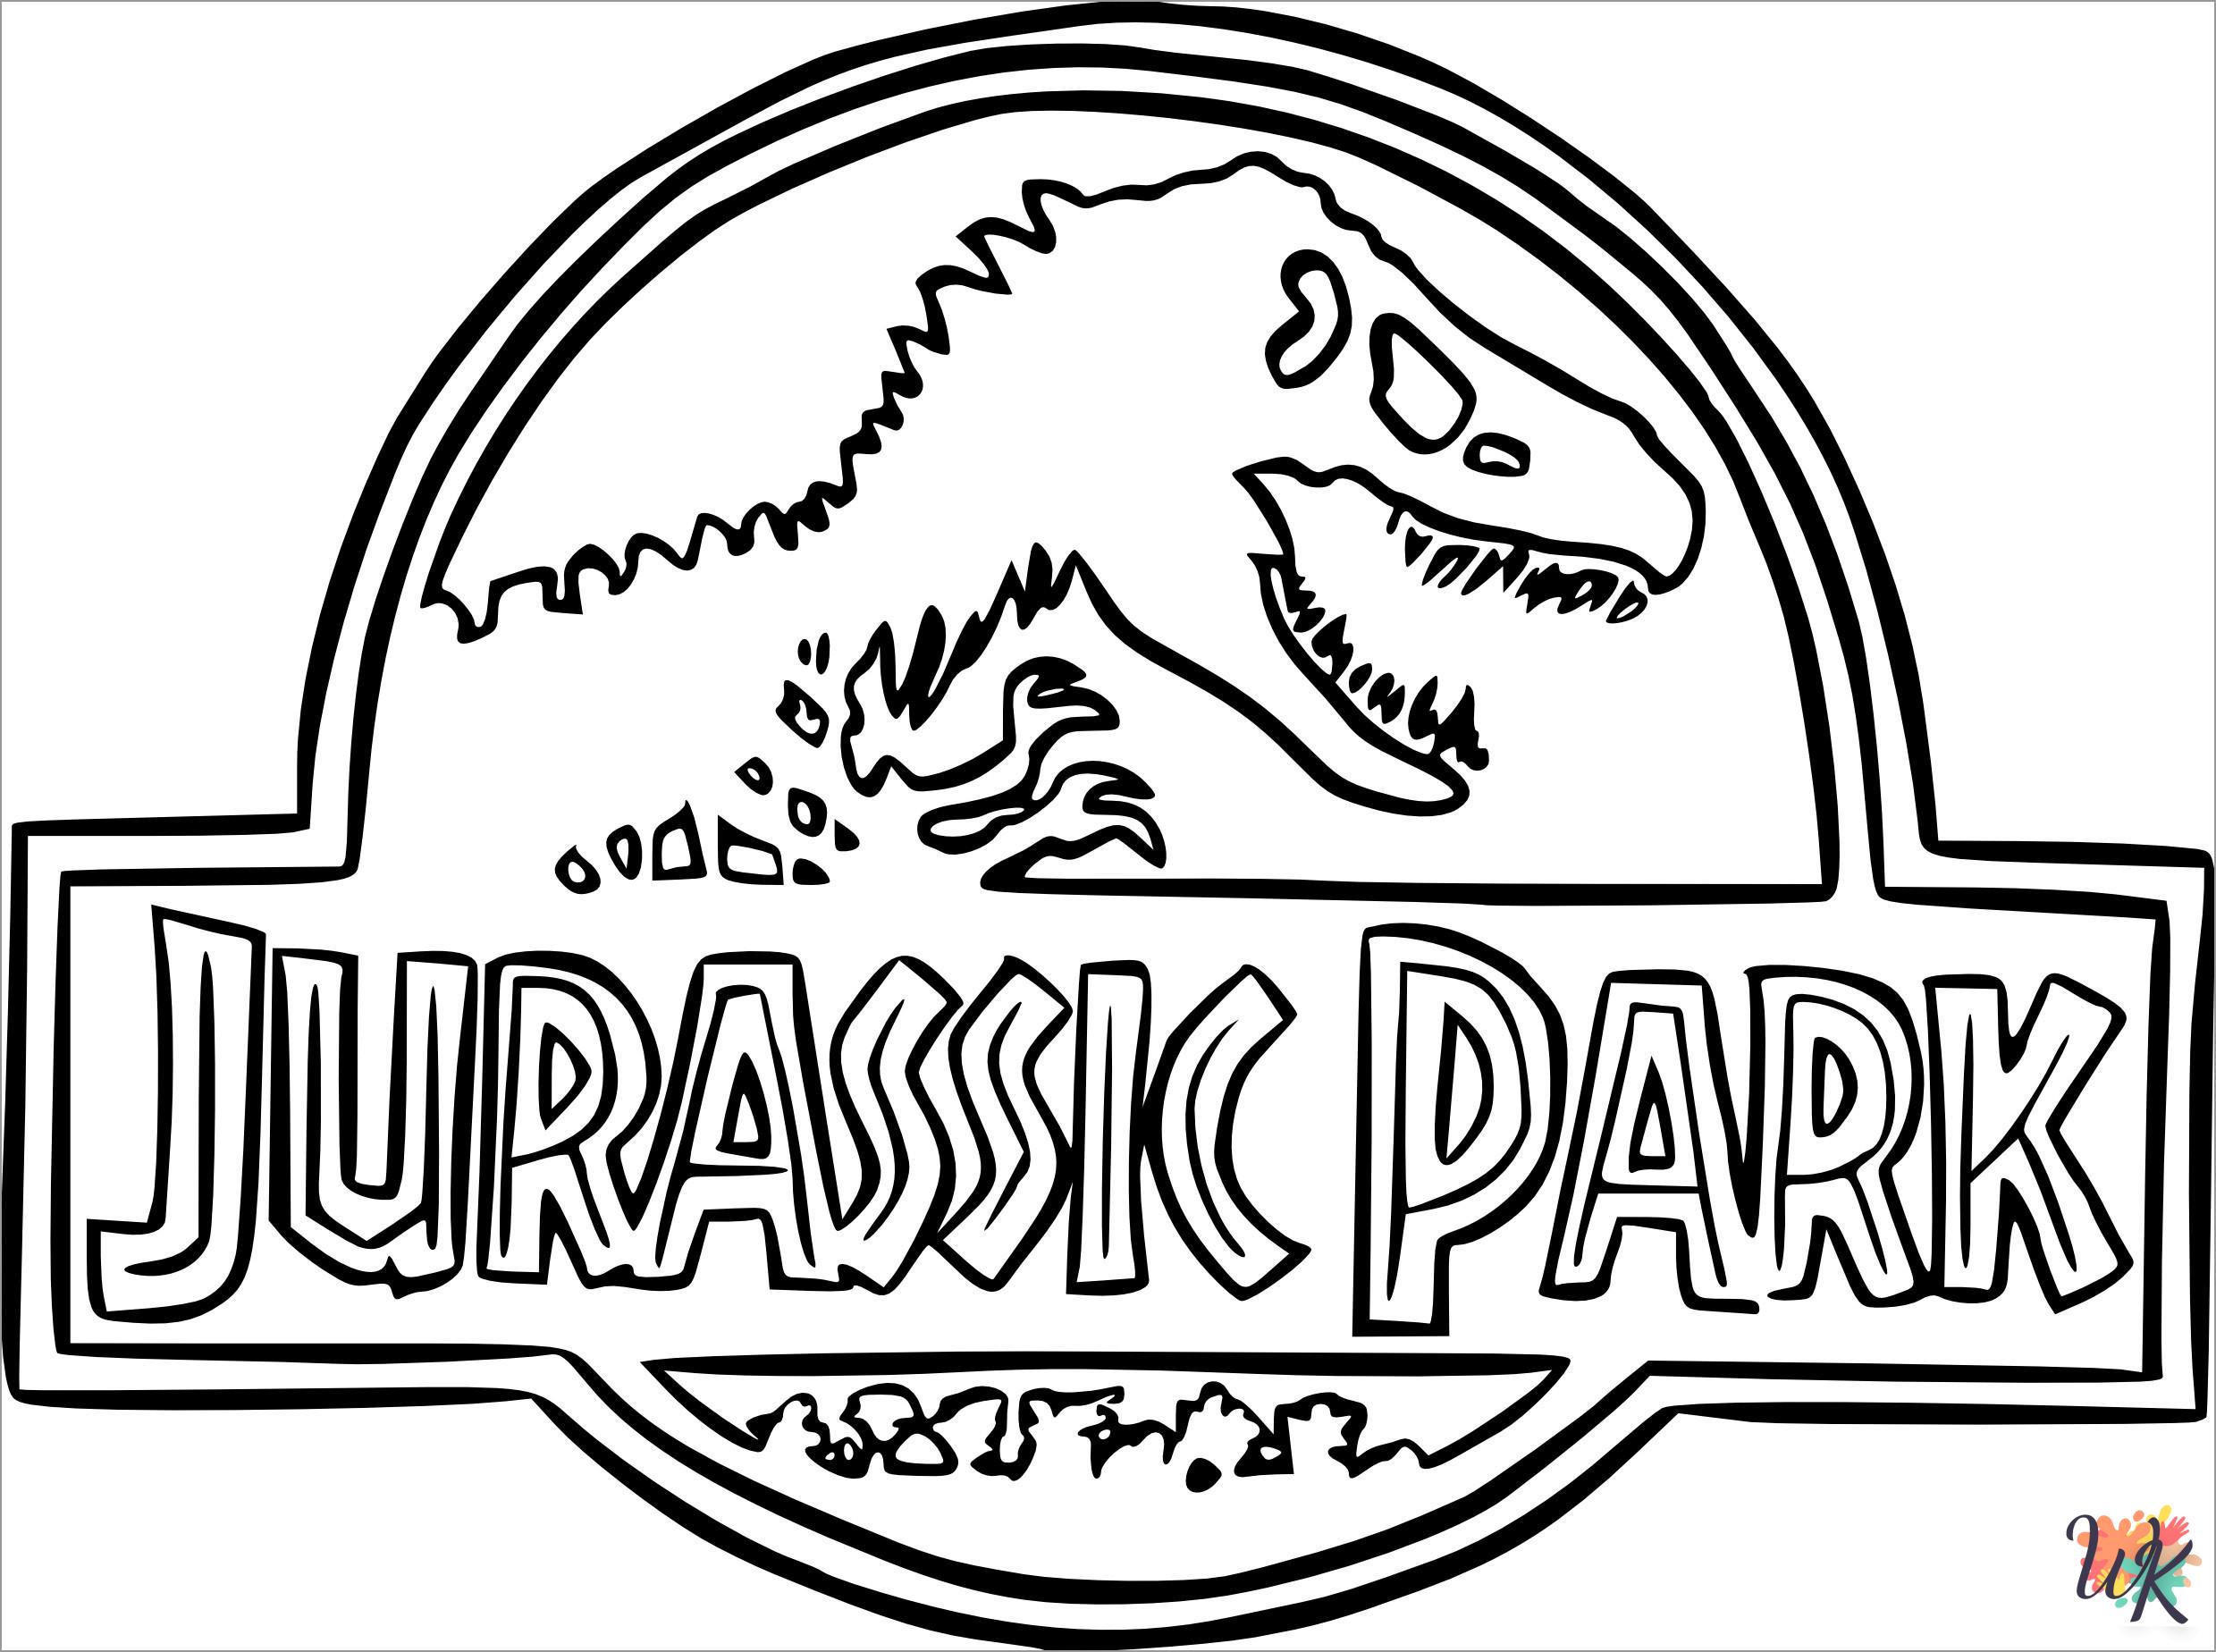 Jurassic Park adult coloring pages